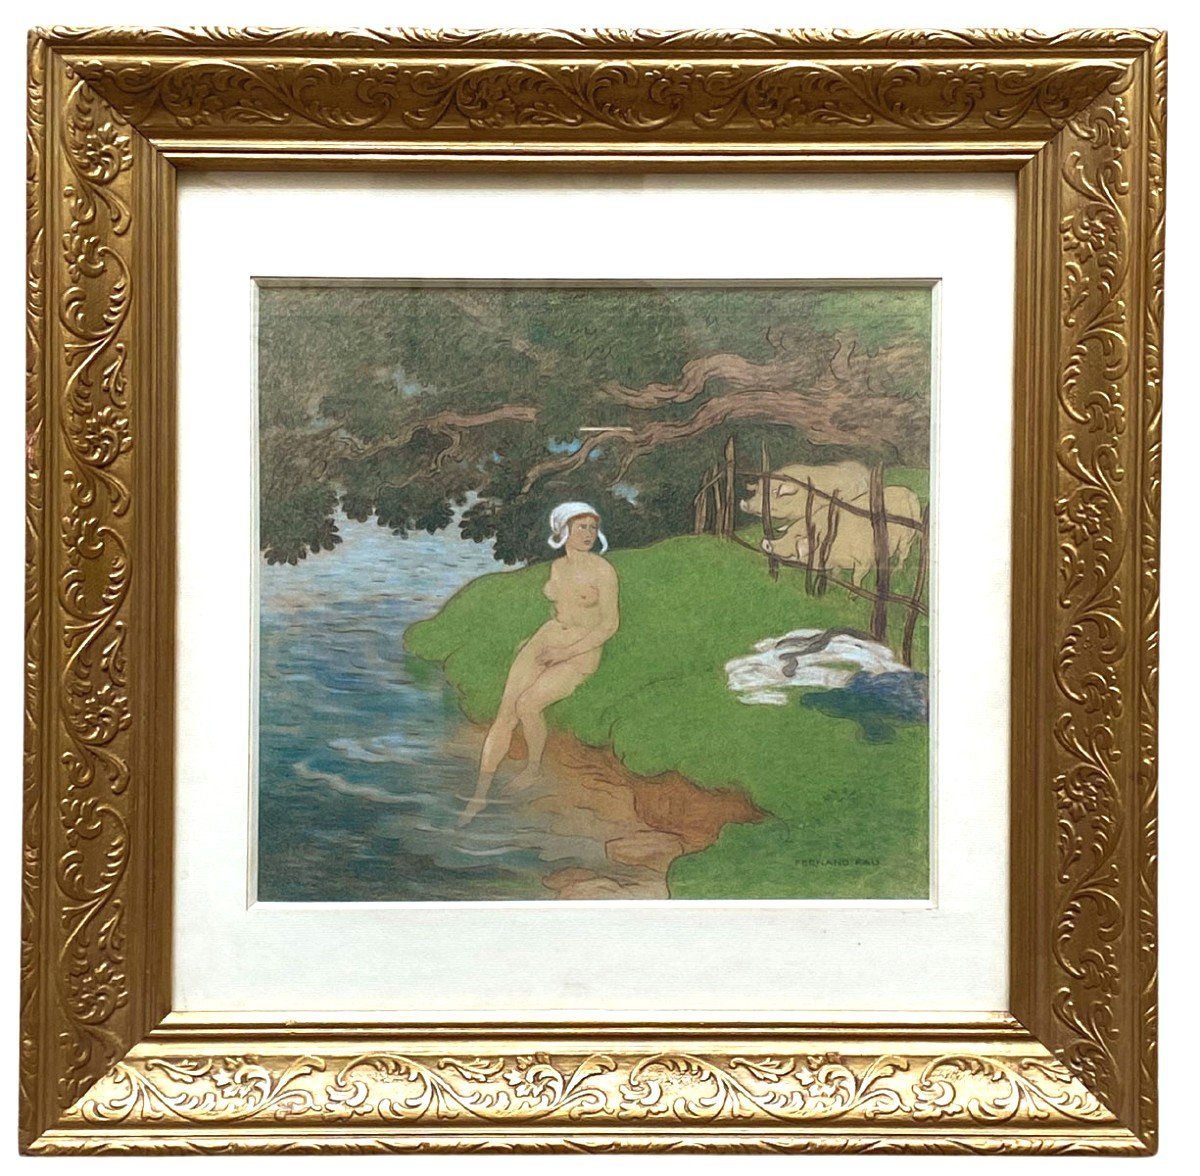  A Pastel, The Bather, By Fernand Fau 